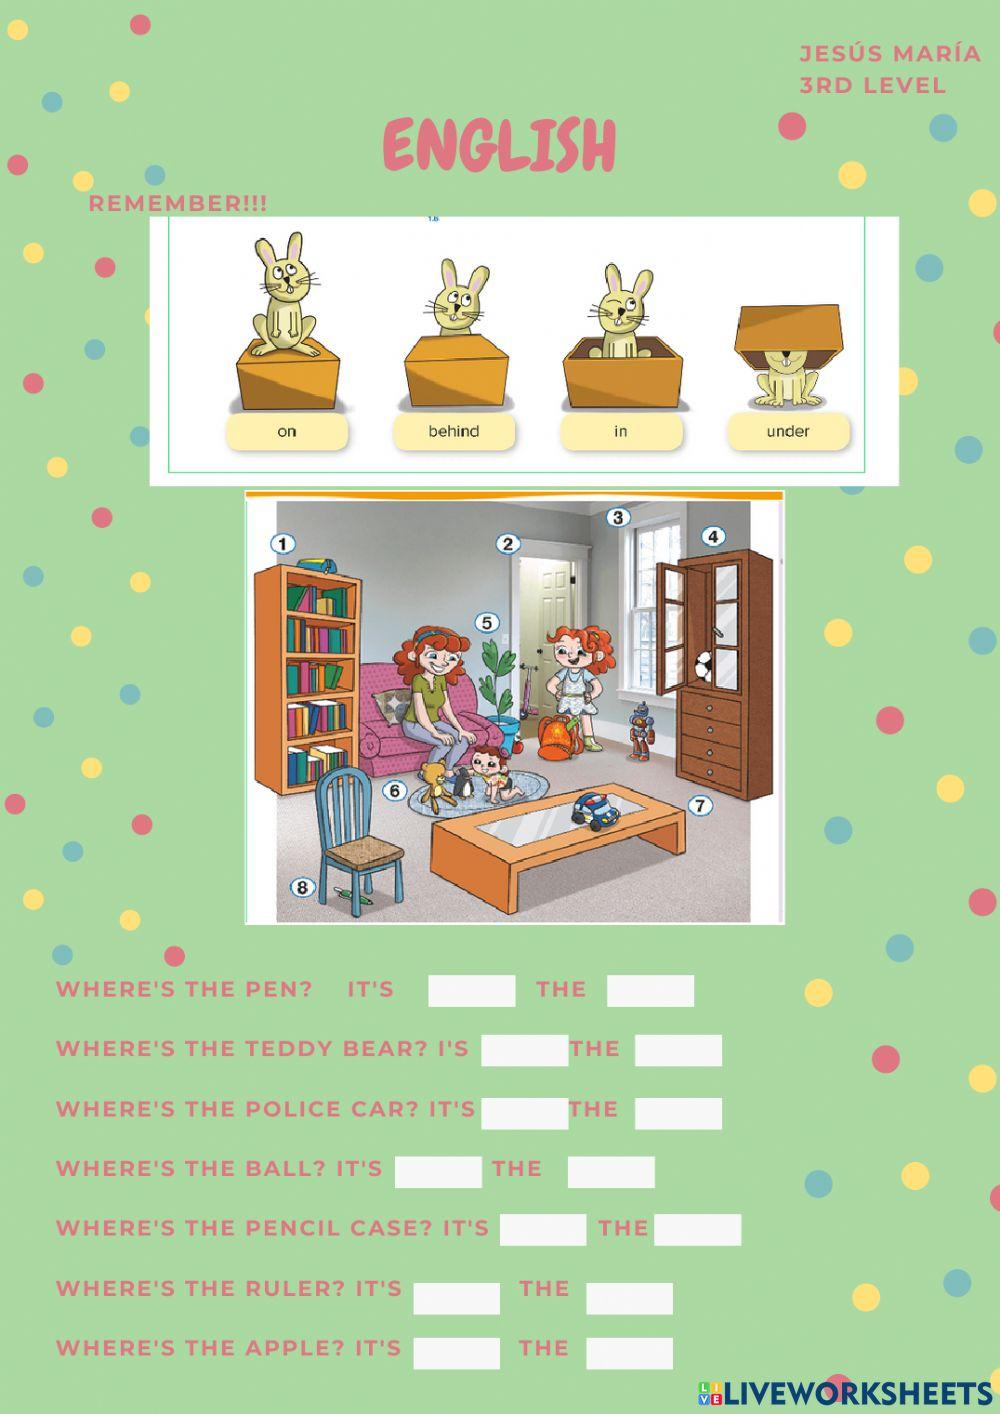 Our house-Prepositions